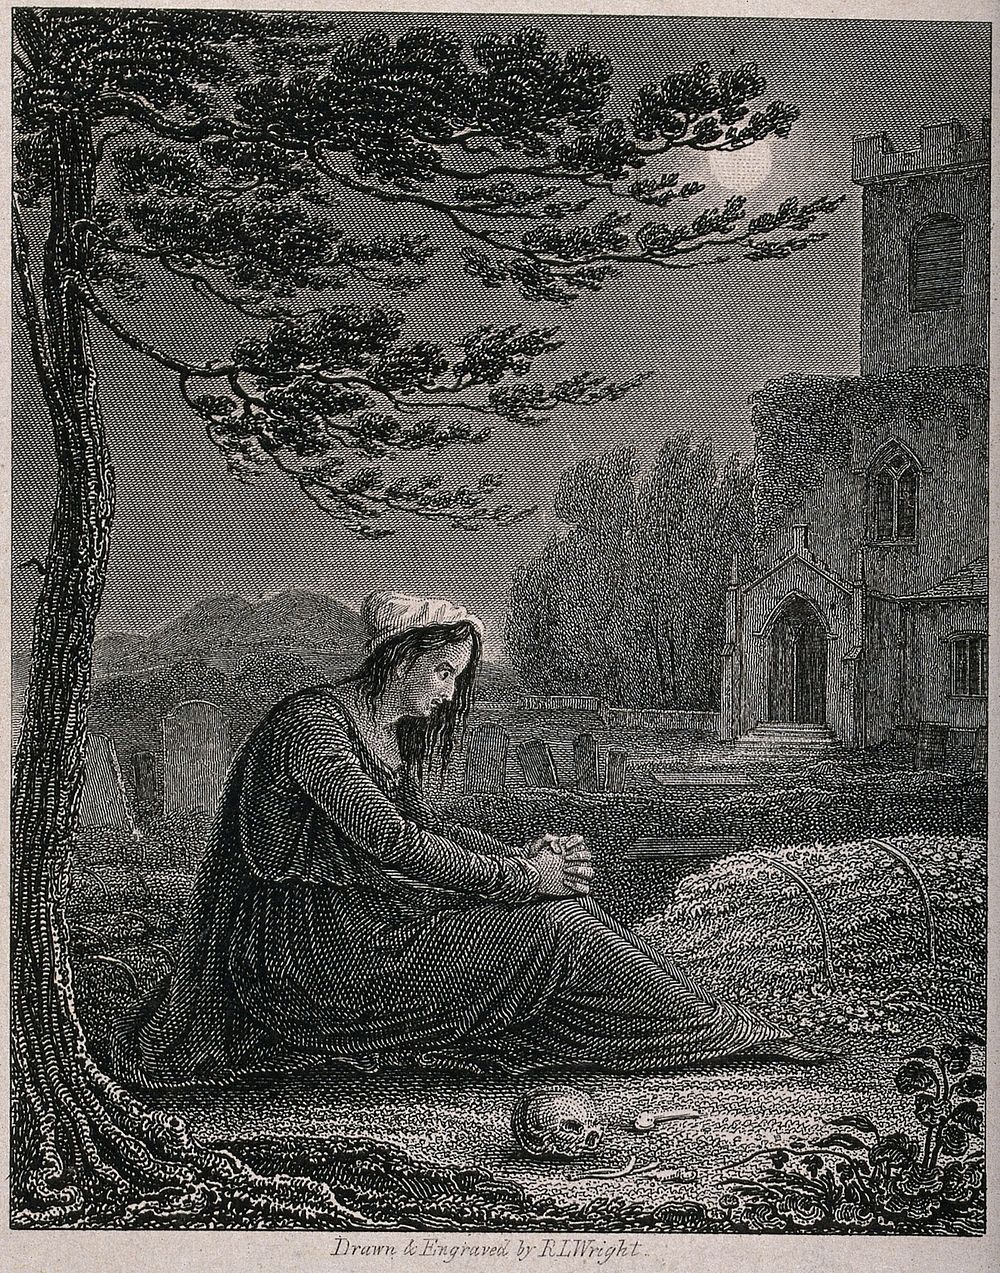 A bereaved mother mourning her dead daughter in a graveyard, stricken with remorse for having treated her harshly in her…